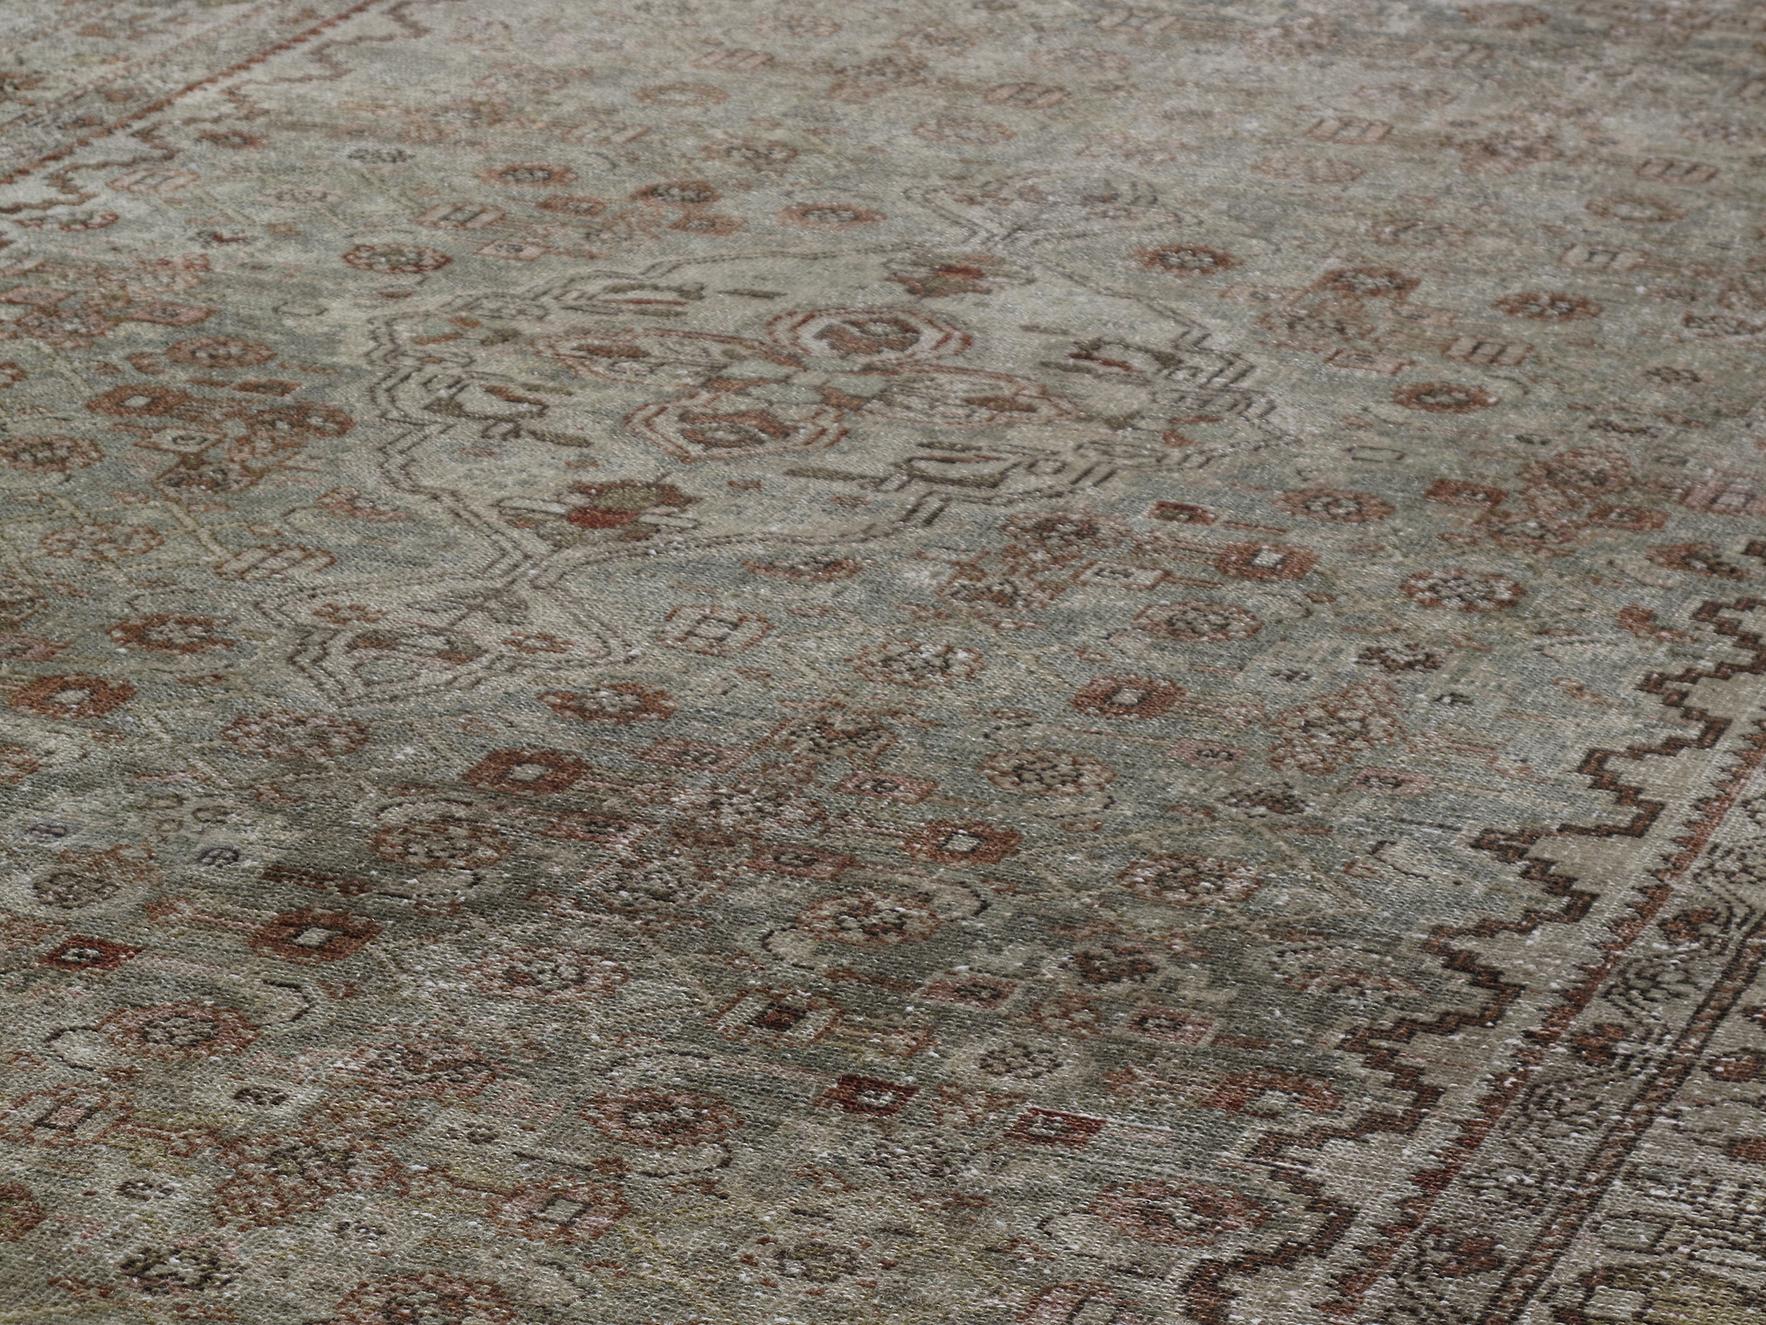 Malayer rugs are named after a major rug weaving village in central west Iran. The village was known for producing extremely fine rugs in the 19th century. They are often characterized by their rich motifs and commonly have a repeated pattern or a